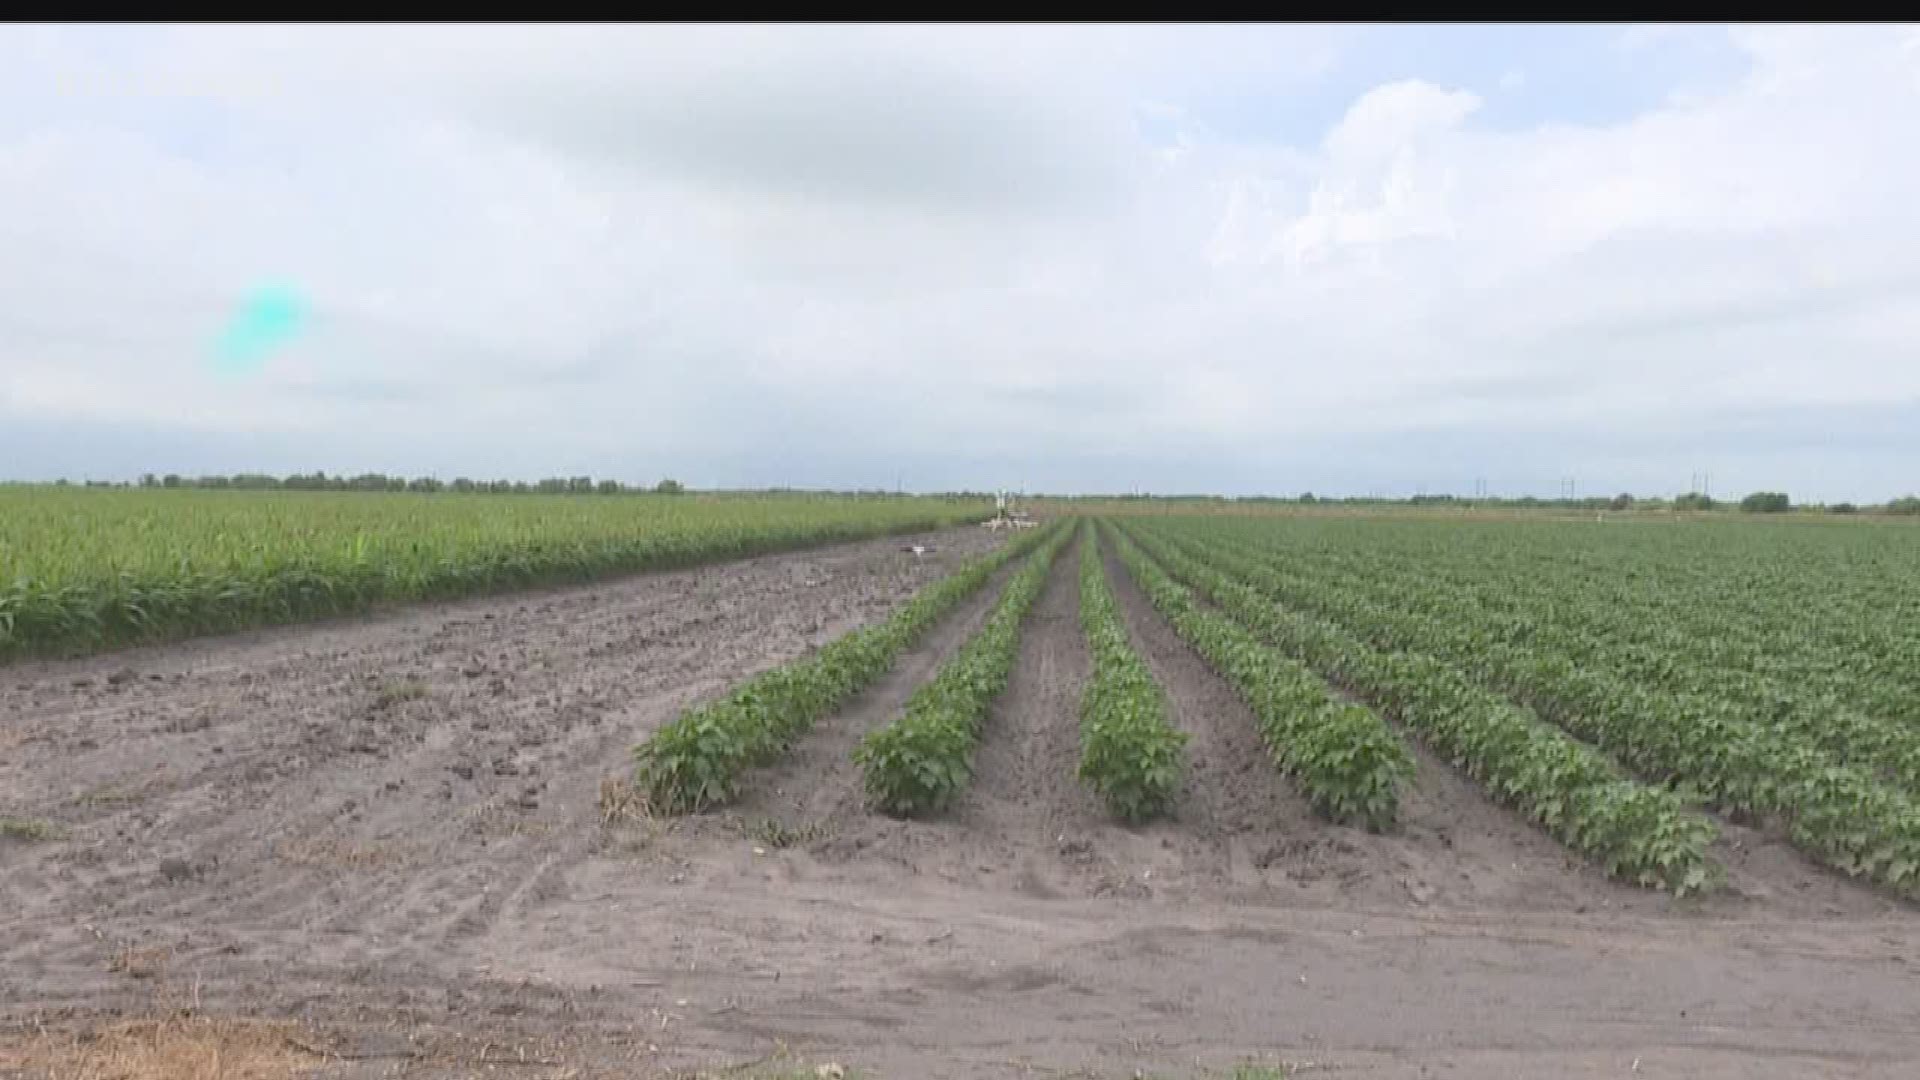 The lack of rain has already wiped out grain crops for some farmers.